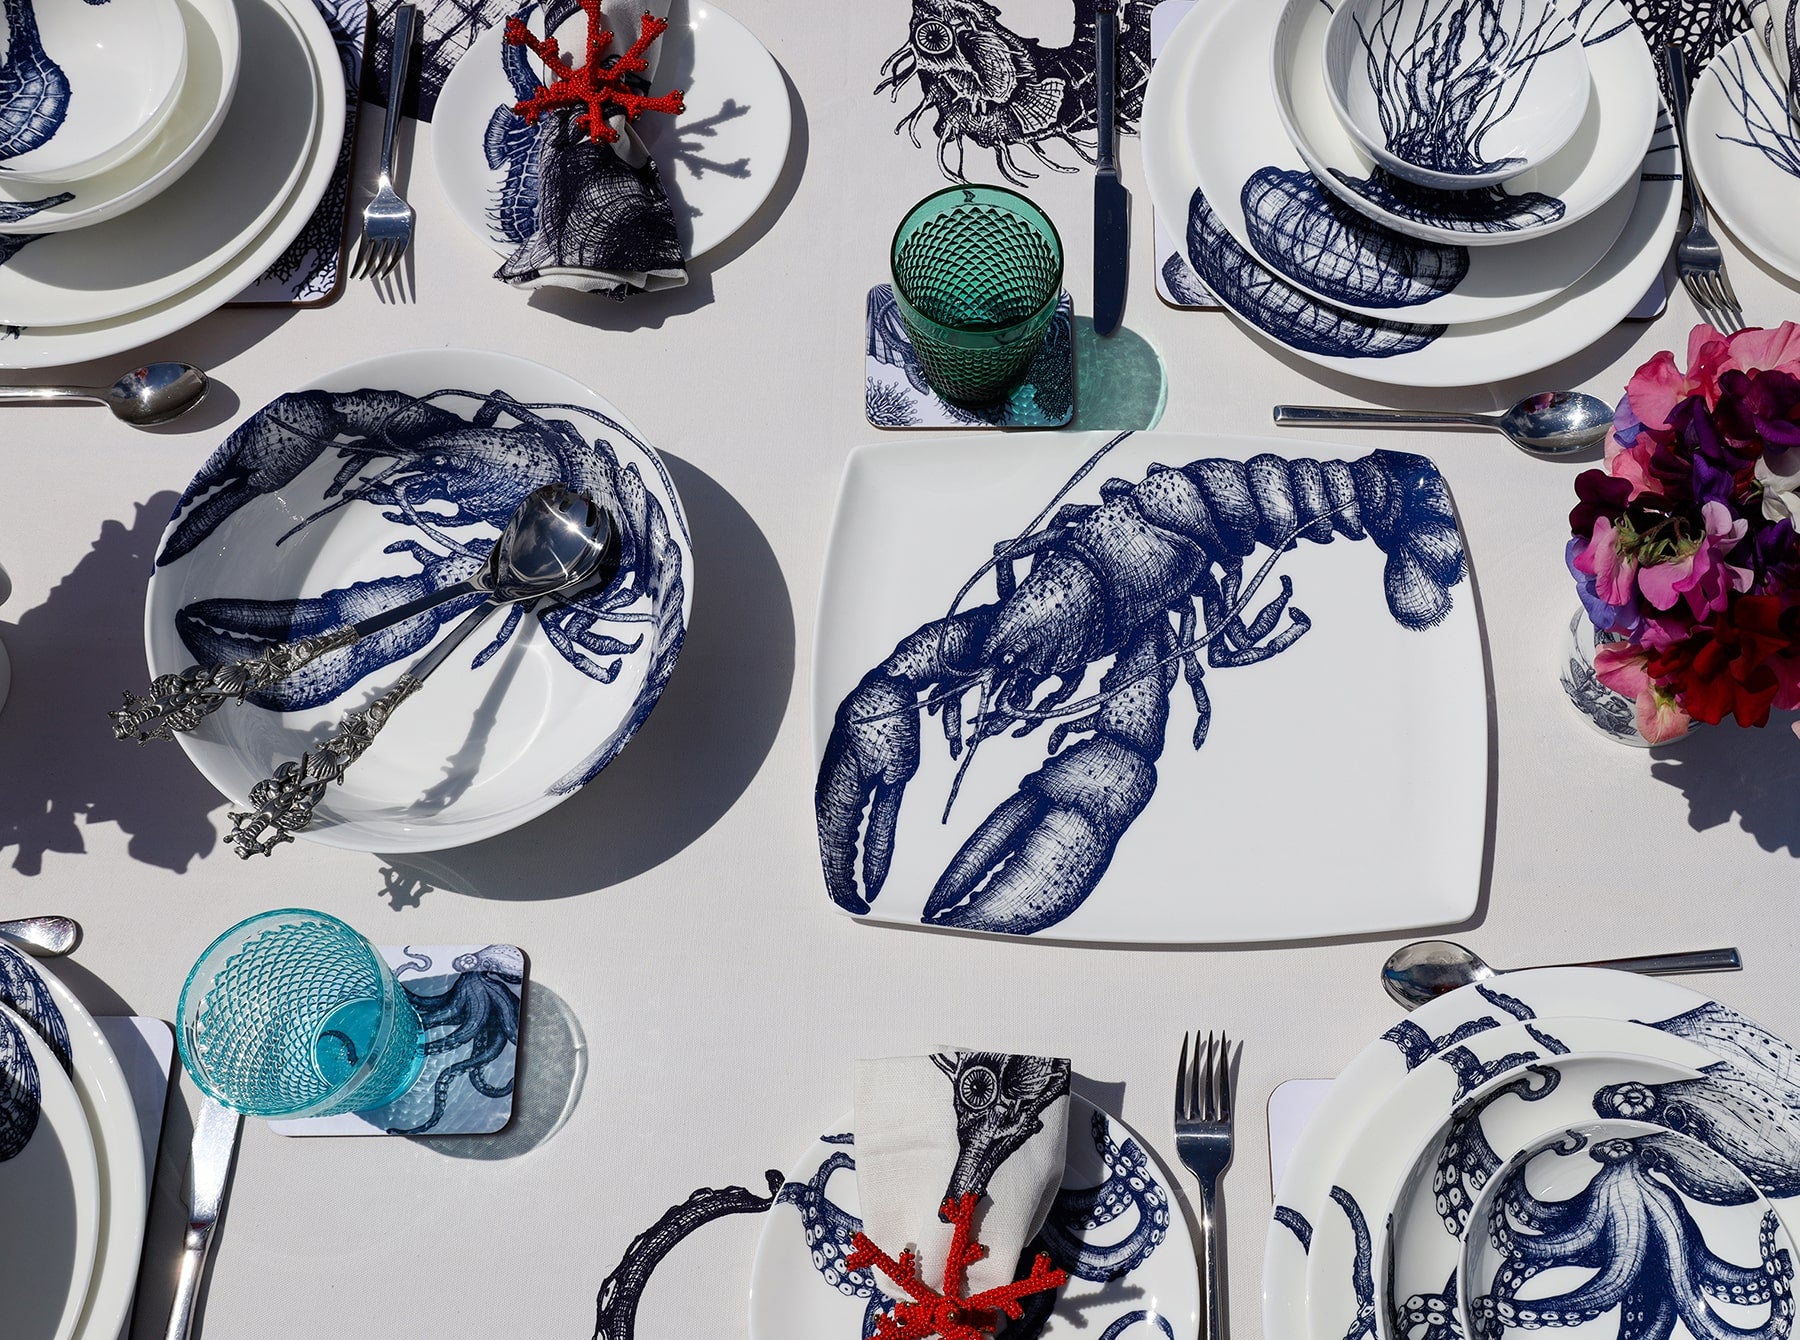 Serving bowl in Bone China in our Classic range in Navy and white in the Lobster design on a white tablecloth.In the bowl are a pair of pewter lobster salad servers,also on the table are other Cream place settings with Dinner plate,side and pasta bowls in Jellyfish and Octopus amongst others